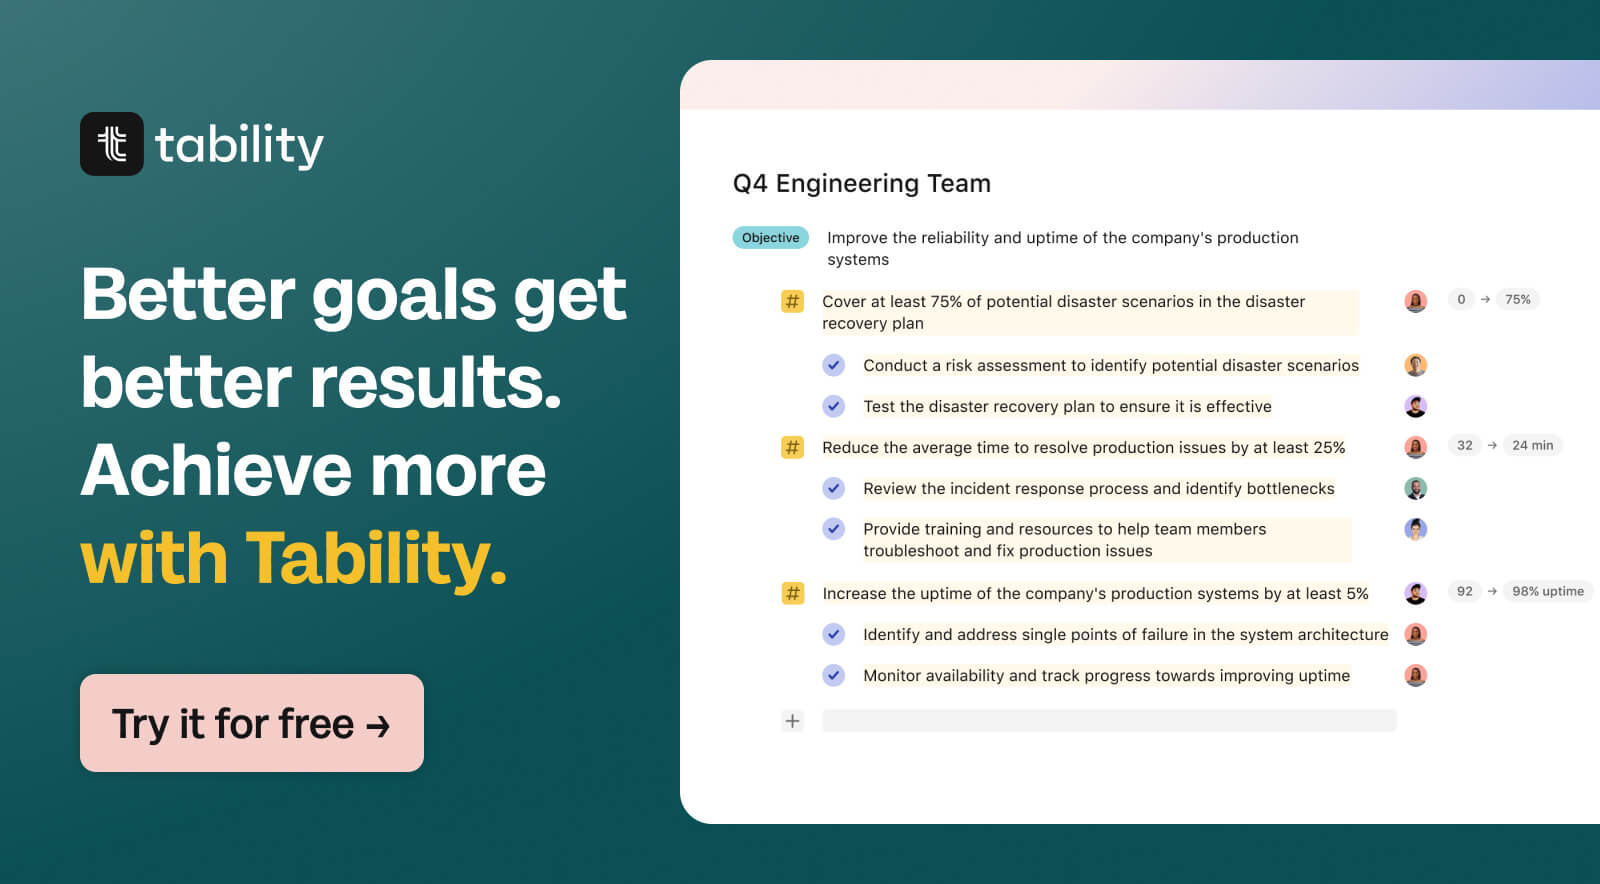 Tability - A tool for goal setting and tracking with OKRs